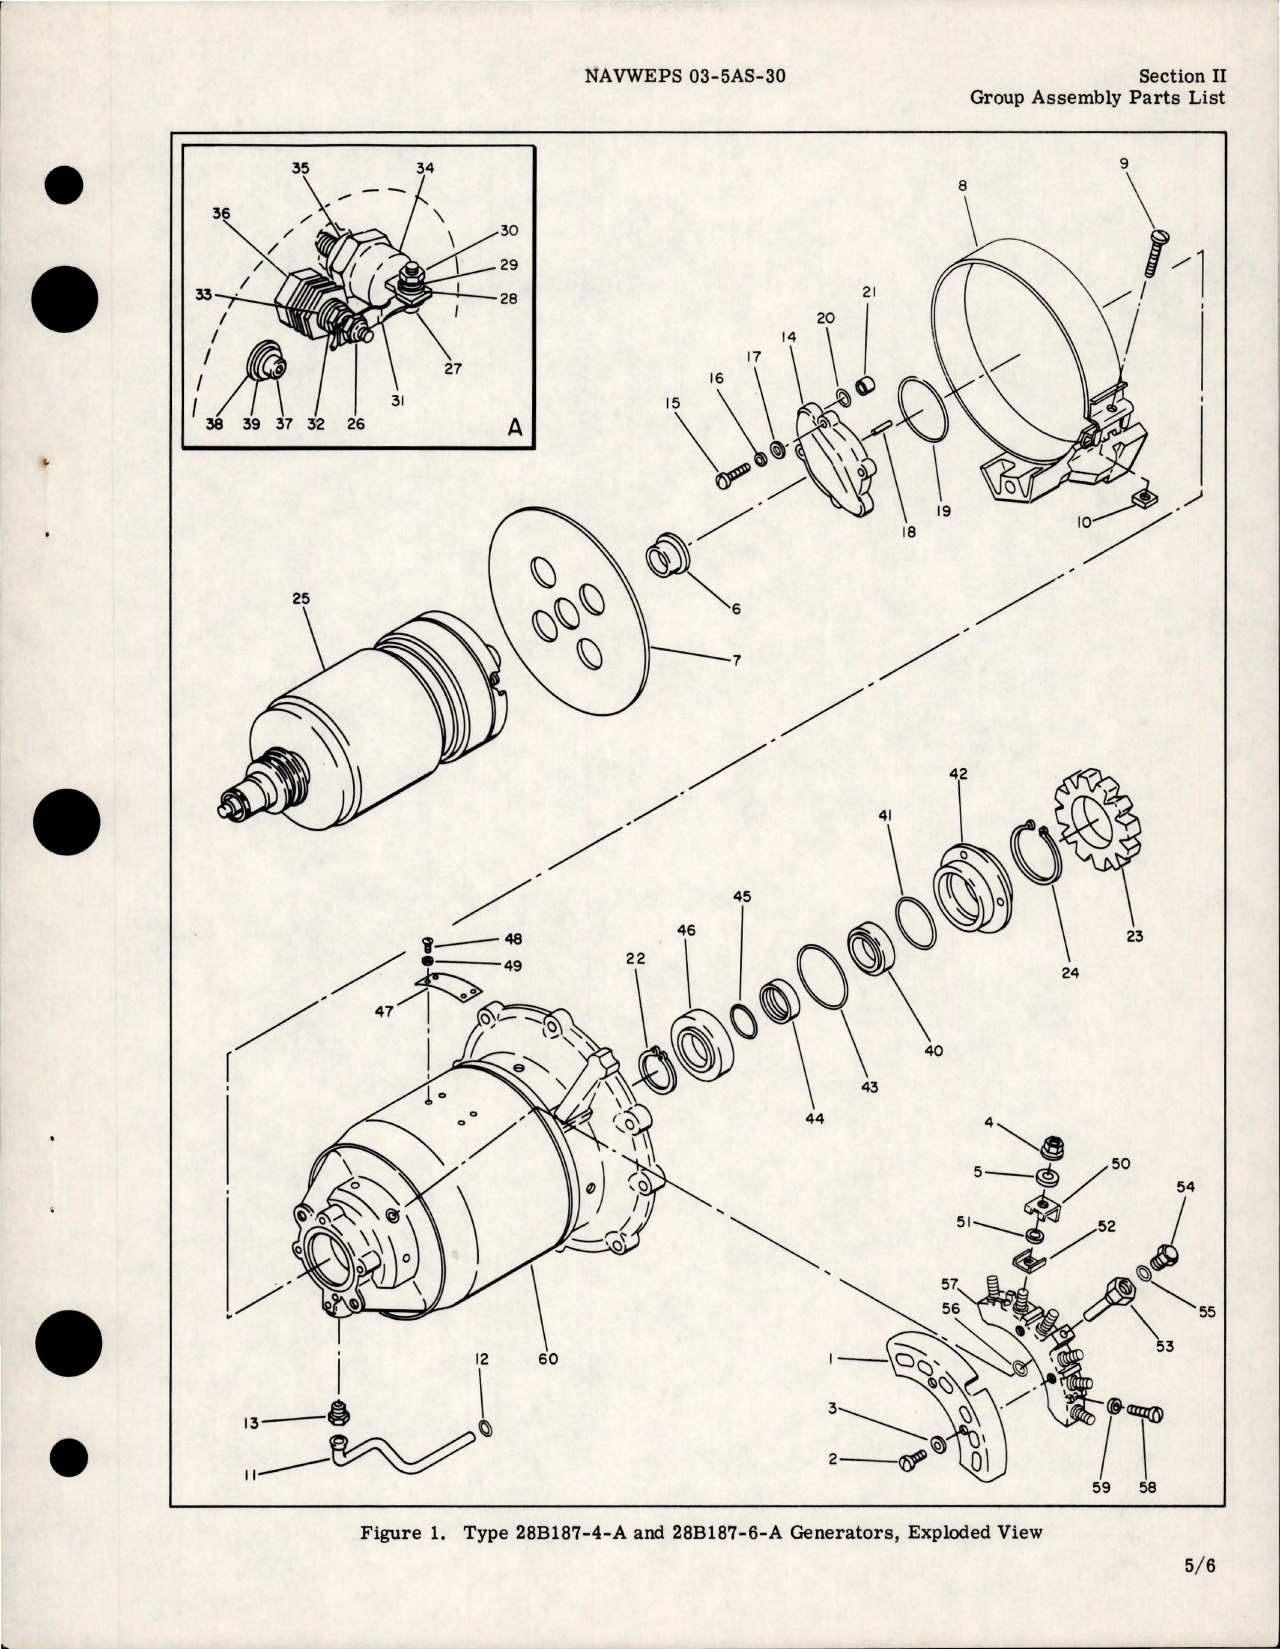 Sample page 7 from AirCorps Library document: Illustrated Parts Breakdown for AC Generator - Type 28B187-4-A, 28B187-6-A 